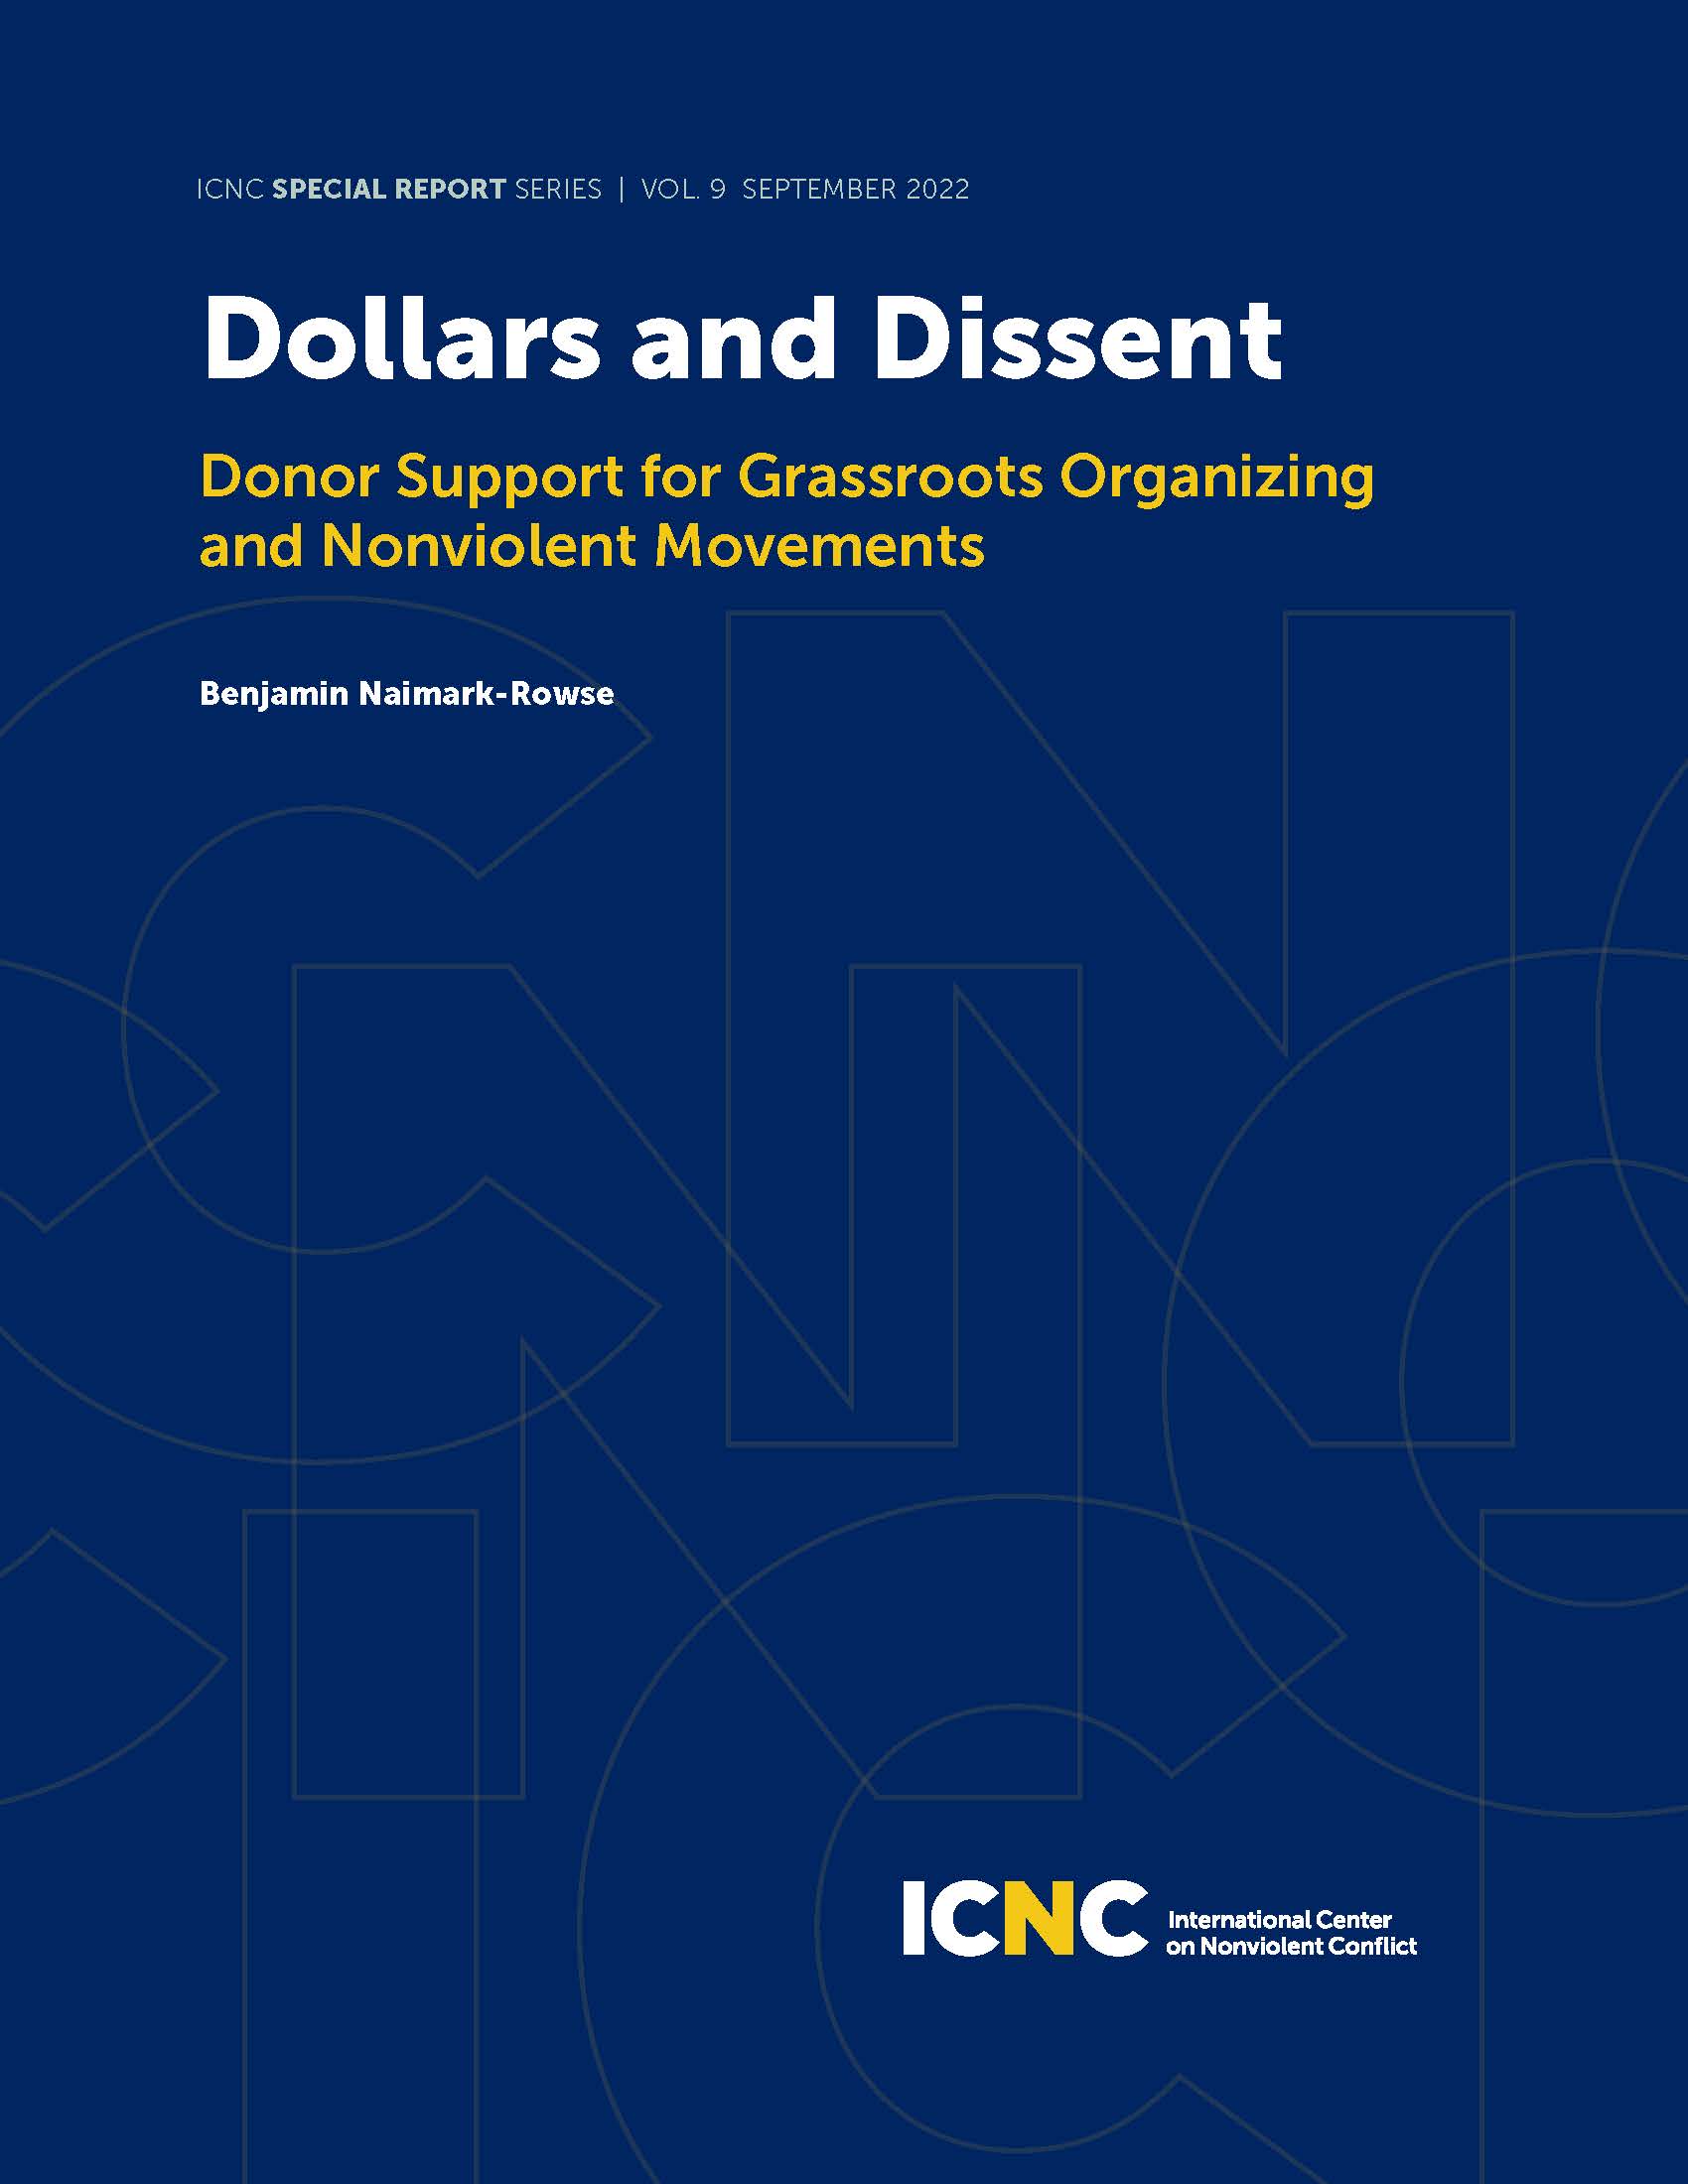 Dollars and Dissent: Donor Support for Grassroots Organizing and Nonviolent Movements